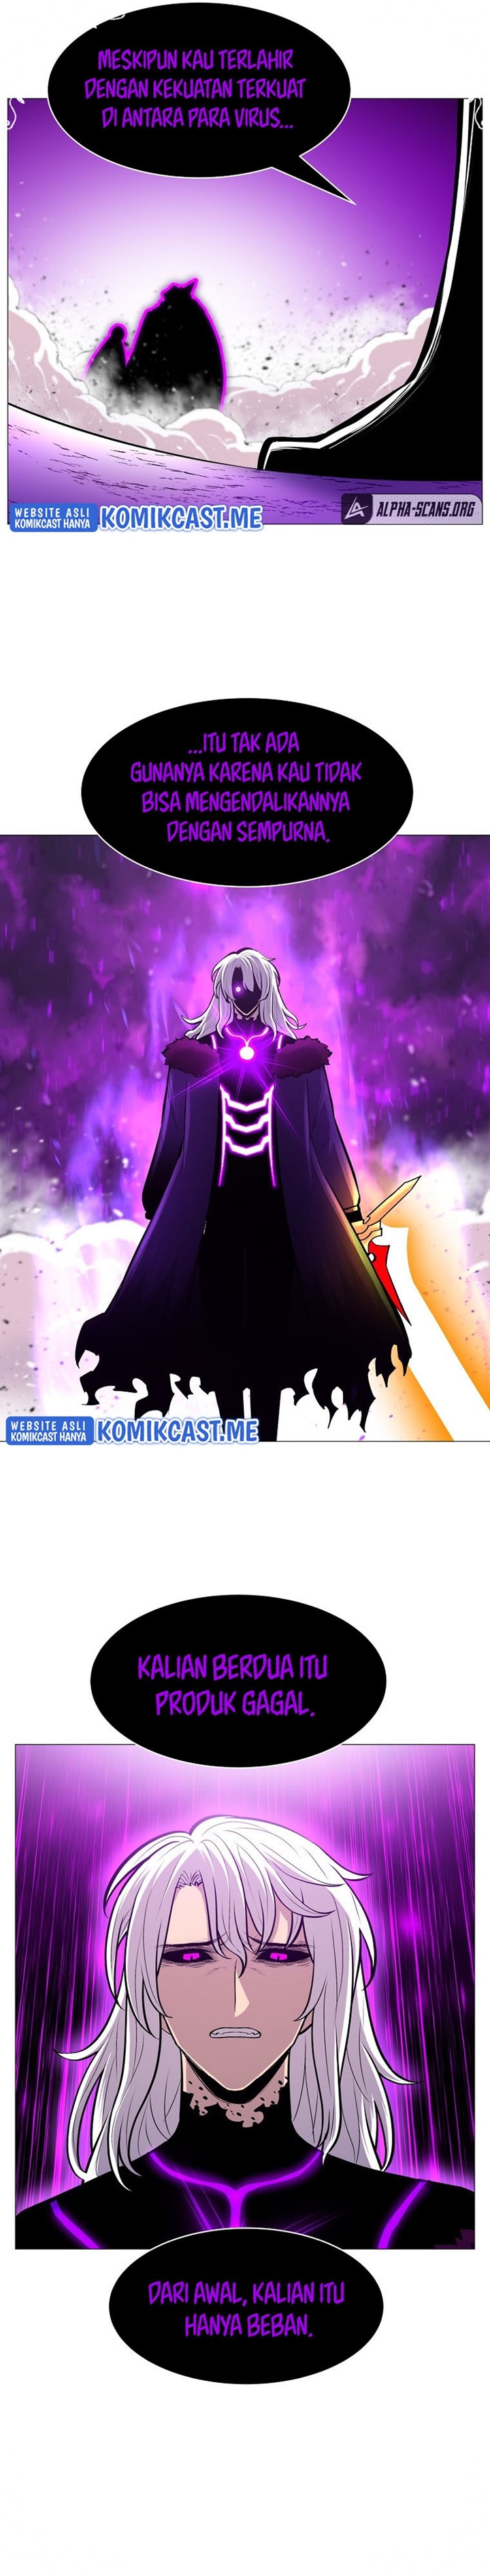 Updater Chapter 89 - 261